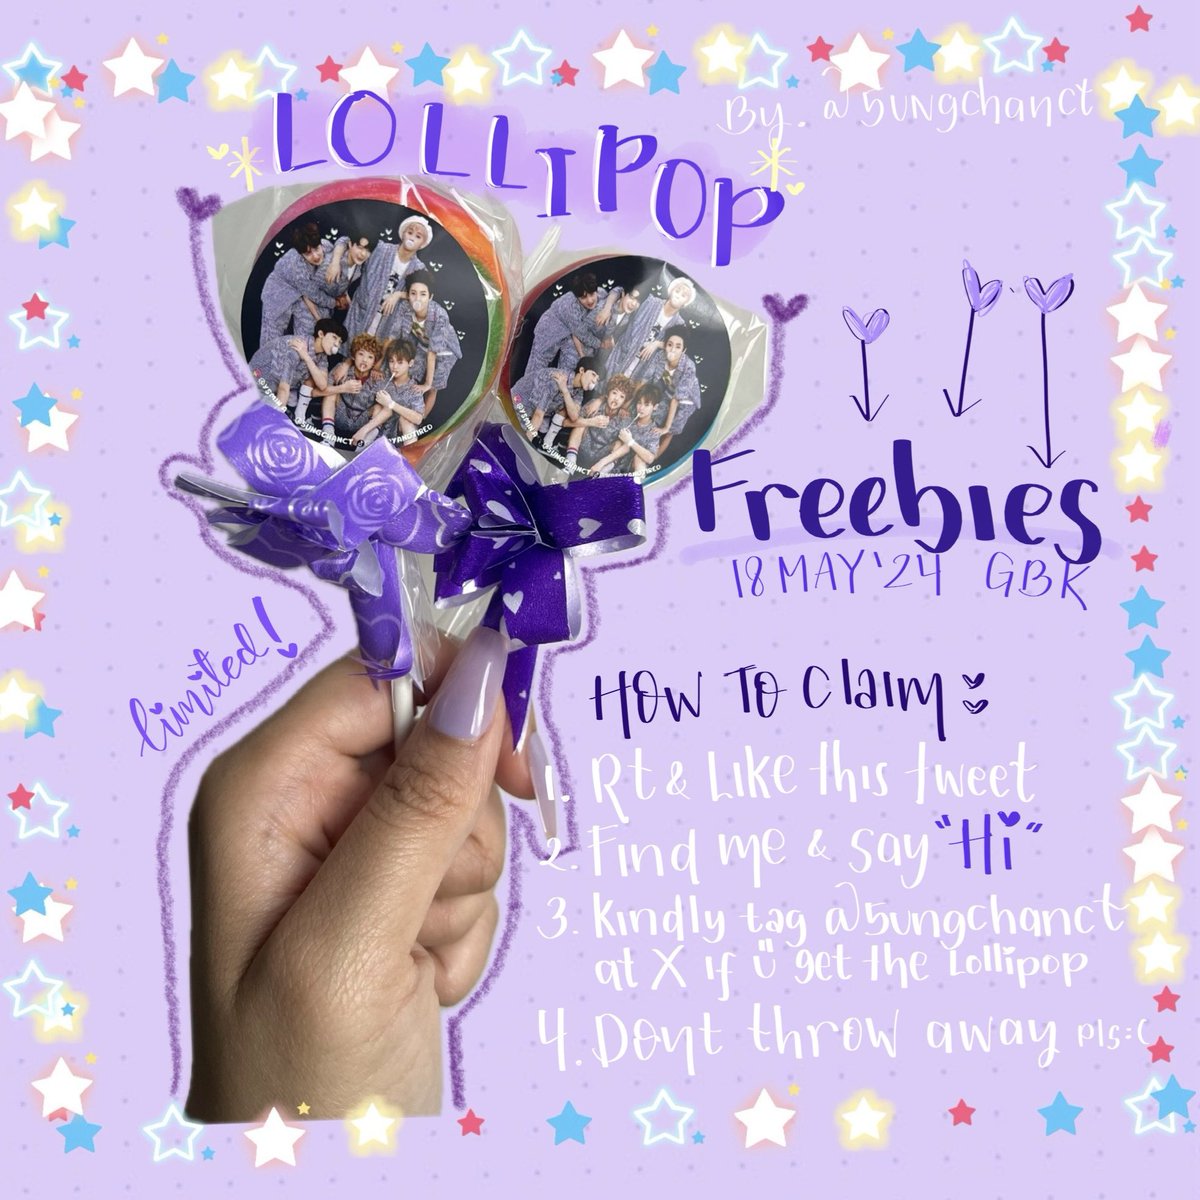 💟 Freebies TDS 3 in Jakarta 💟 

📍at GBK Arena
🗓 18 May 2024

• RT & Like this tweet!
• Find me & say 'Hi!'
• Kindly tag me @5UNGCHANCT if you get the lollipop 🍭
• Dont throw away please 😿🙏🏻
• ⏰ TBA

See you guys! 💗

#TDS3INJKT #THEDREAMSHOW3inJAKARTA